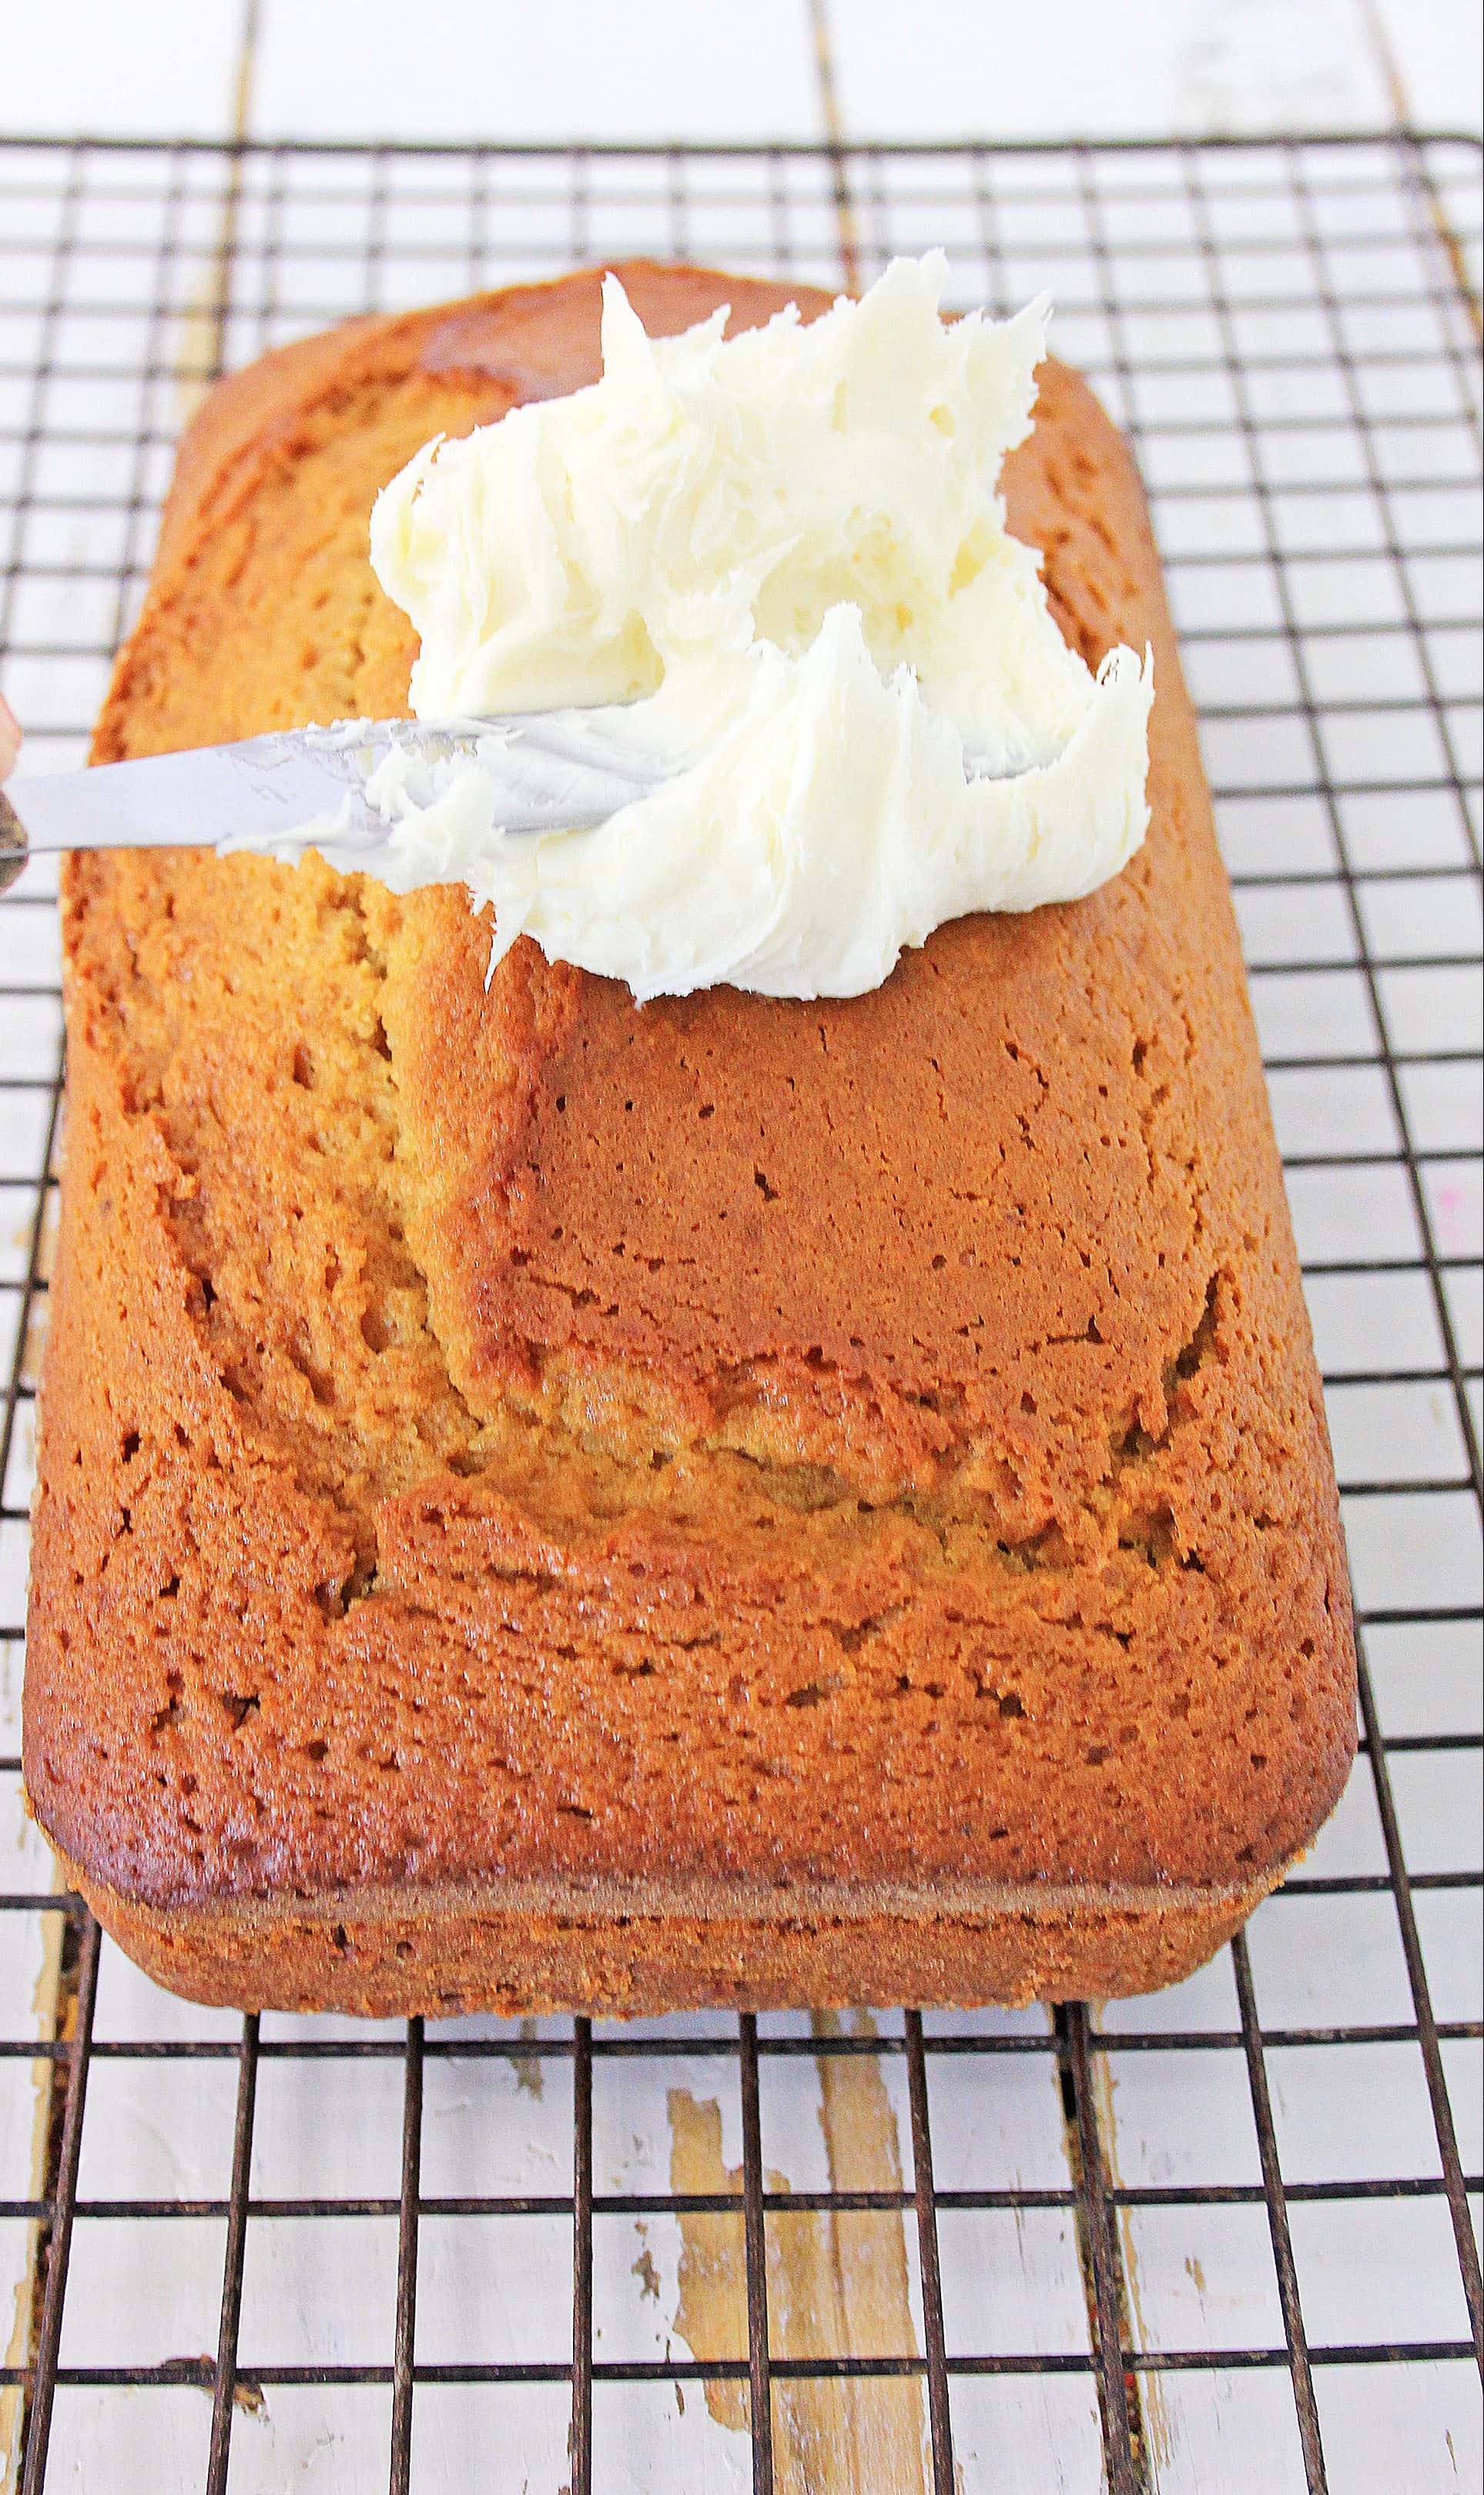 This Gingerbread Loaf with Cream Cheese Icing is perfect for holiday gifts or Christmas parties! Celebrate the season with this amazing recipe! #gingerbreadloaf